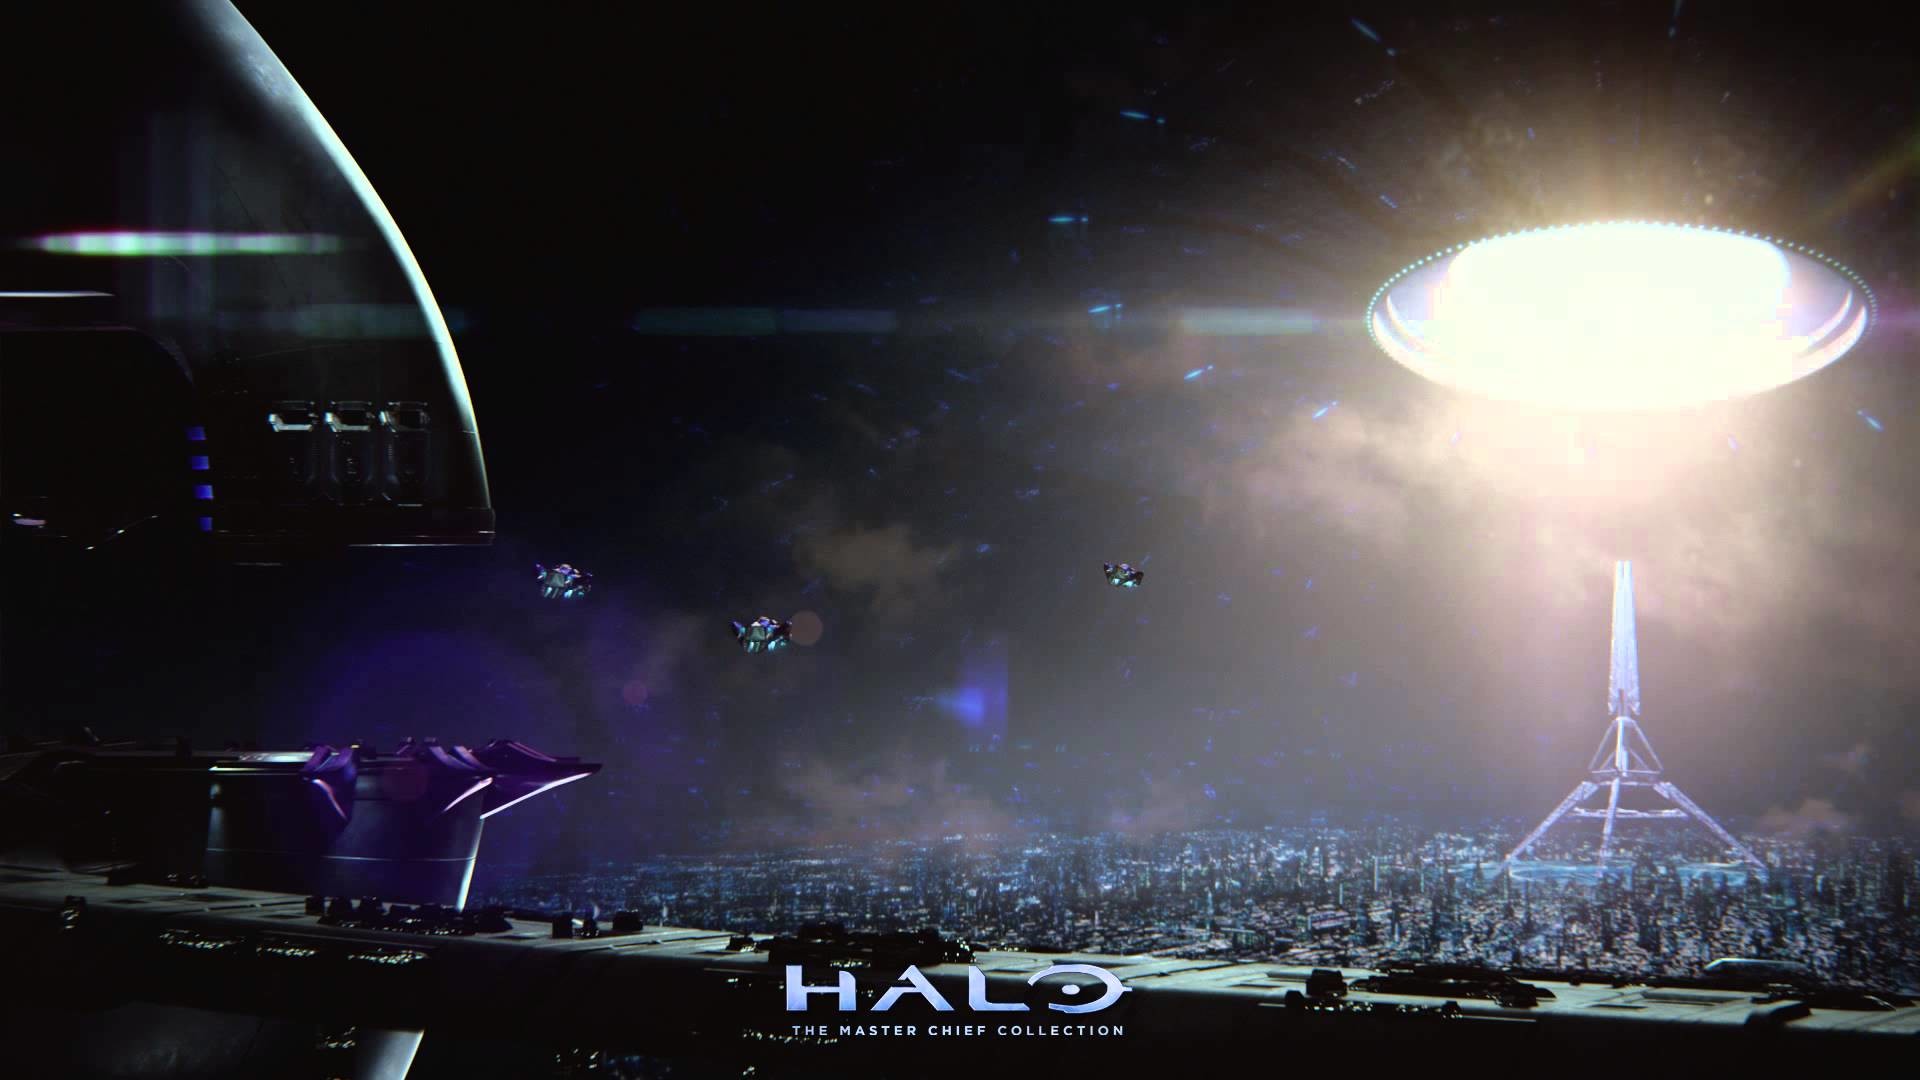 1920x1080 Halo 2/Halo 2 Anniversary OST - "Pursuit of Truth" and "Charity's Irony"  remix - YouTube